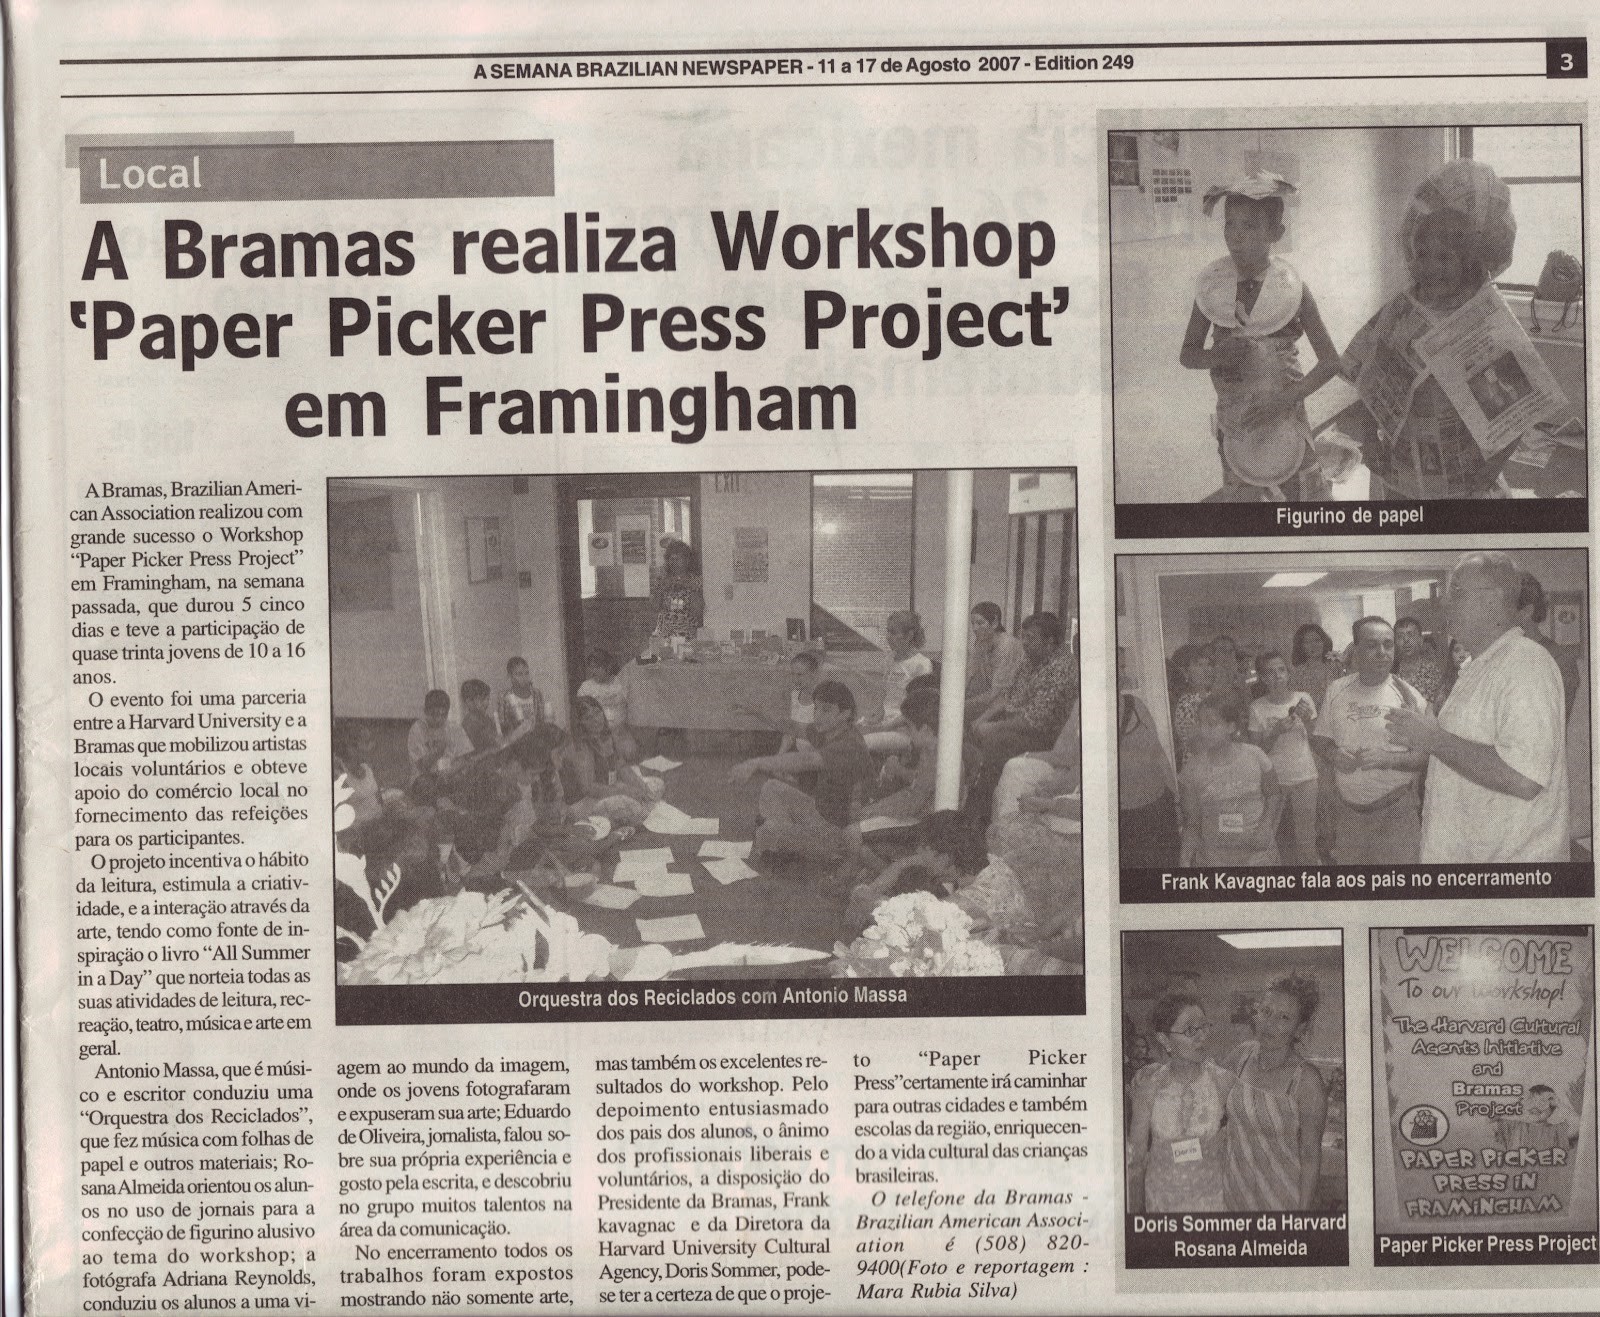 <p>The Bramas realized a “Paper Picker Press Project” Workshop in Framingham</p>
